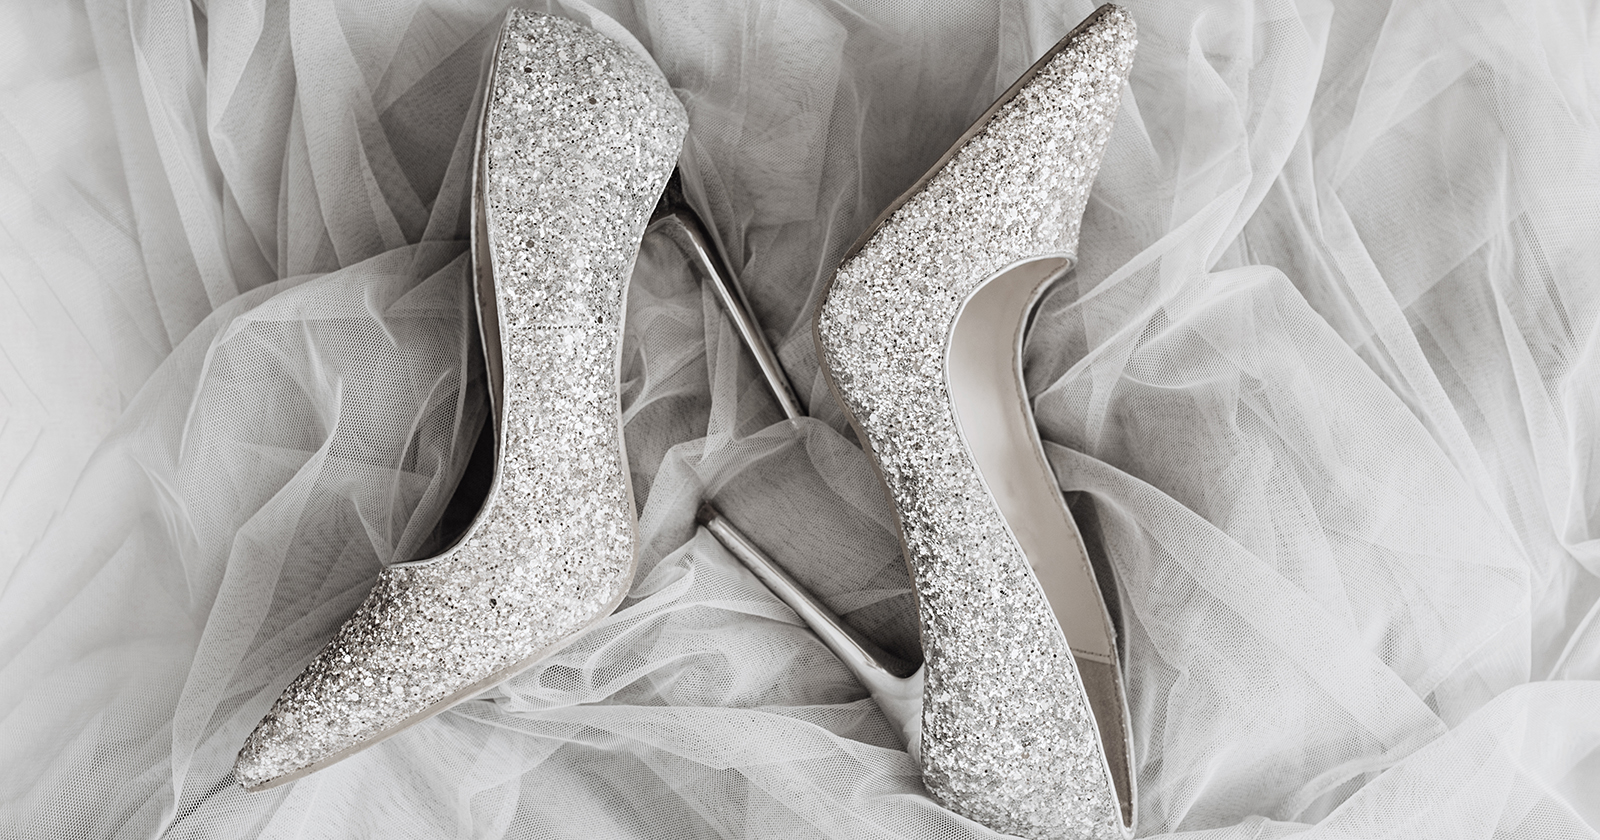 Sparkly Wedding Shoes: The 15 Best Ideas + Faqs